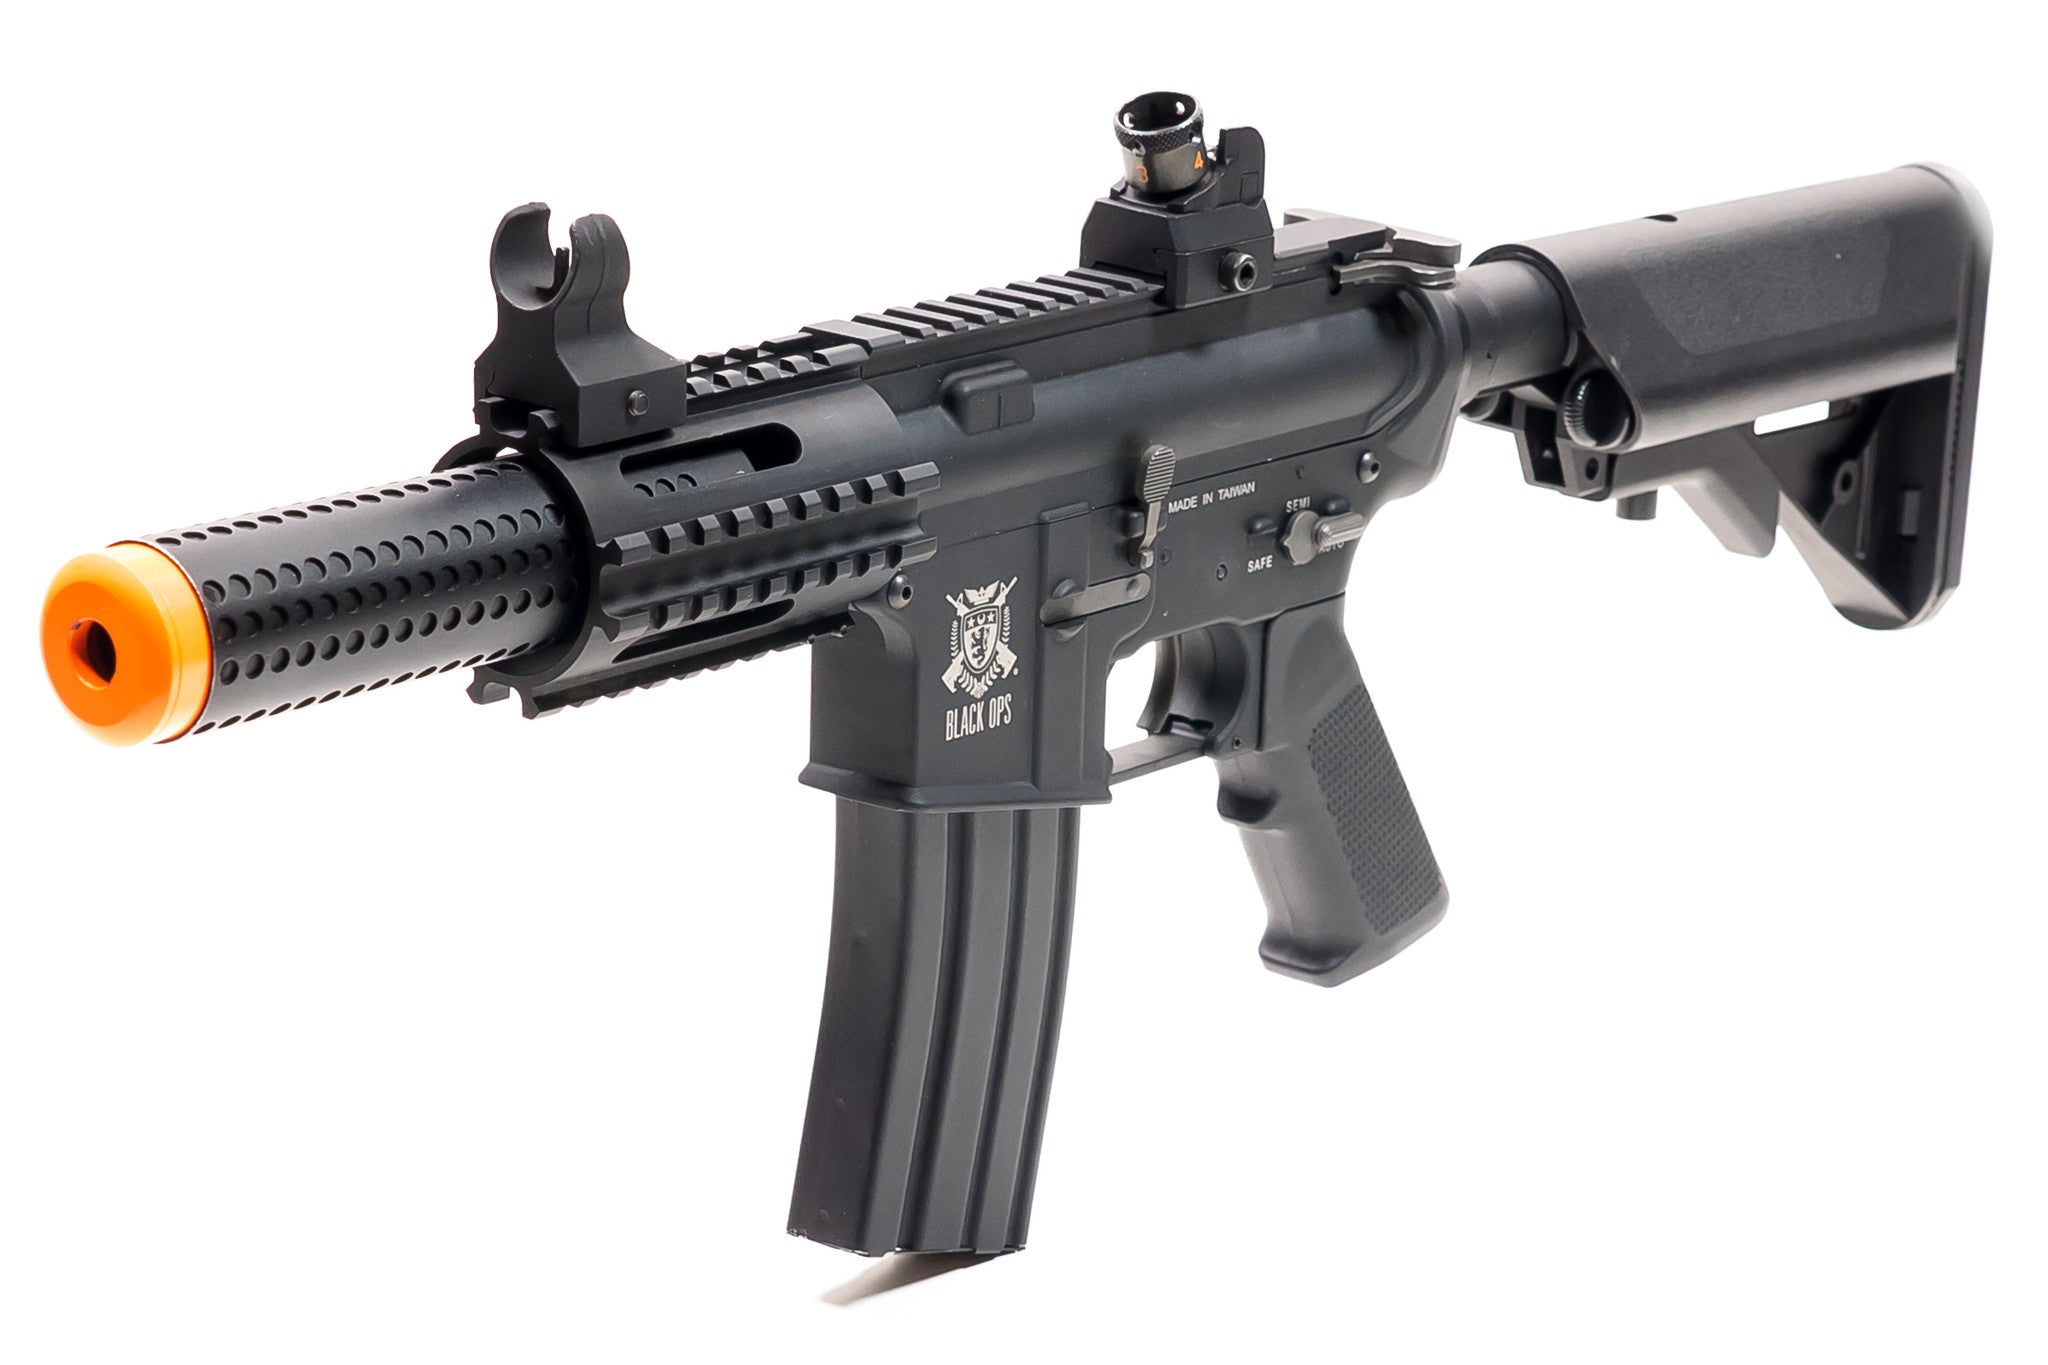 Black Ops Viper Airsoft Rifle - Black Ops USA